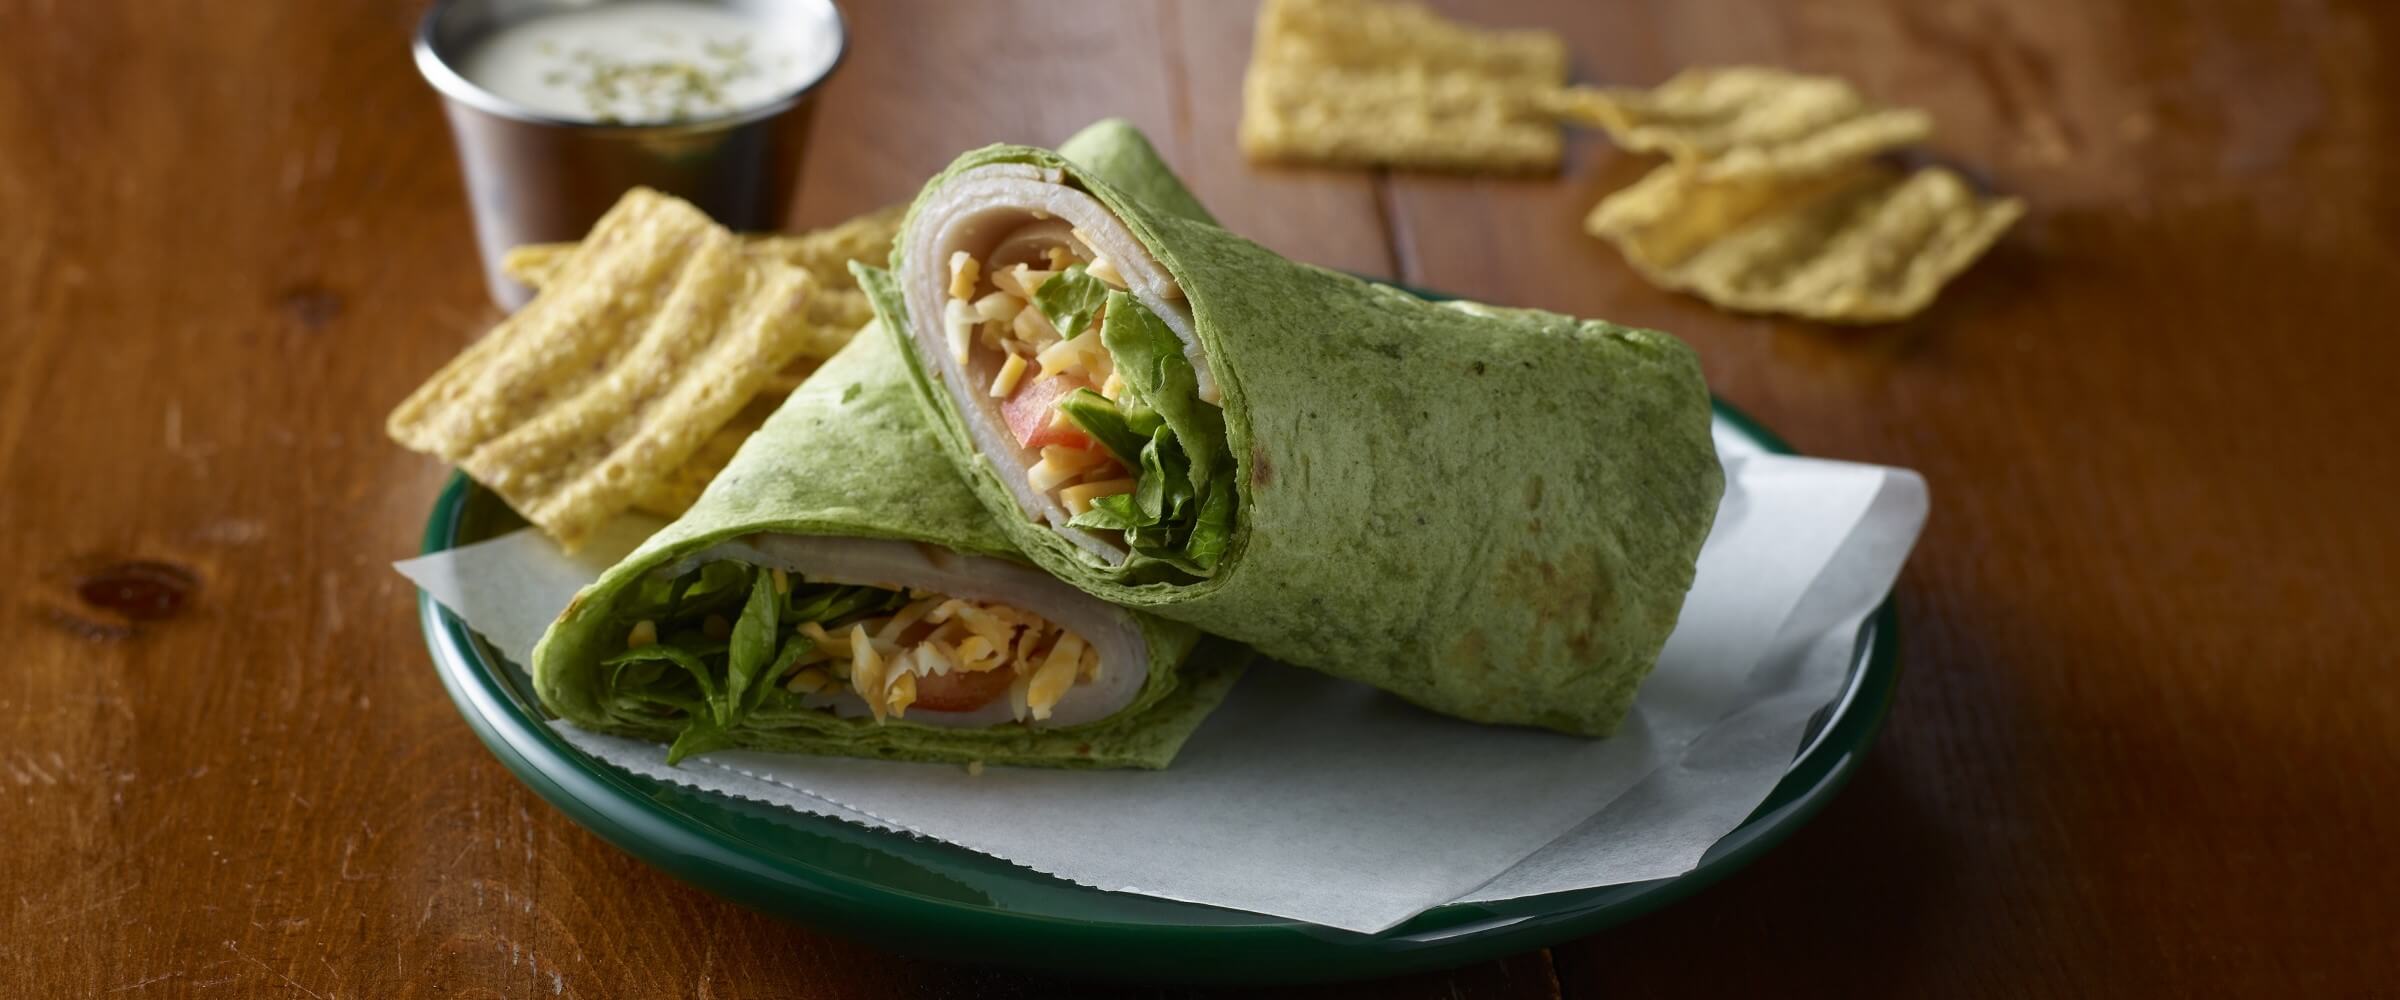 turkey ranch wrap in green tortilla with chips on the side